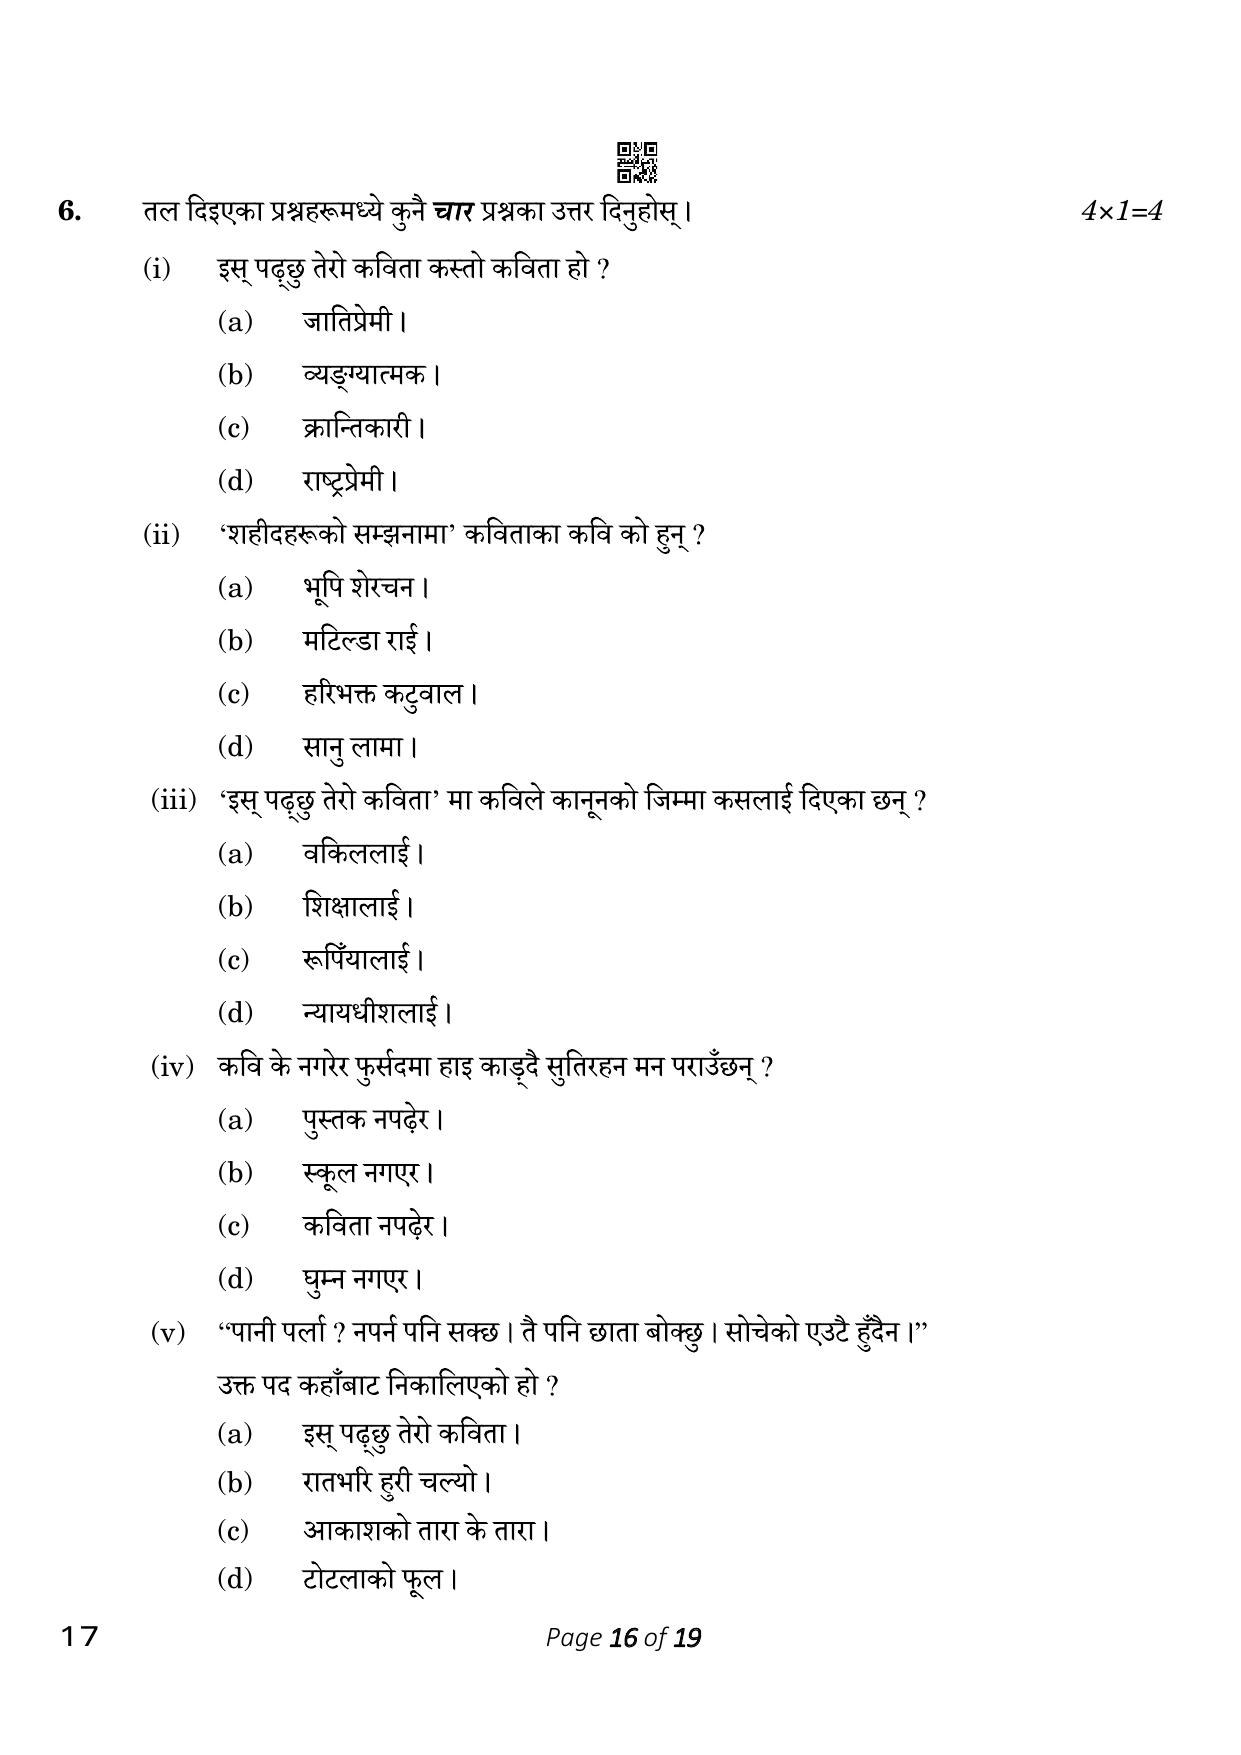 CBSE Class 10 Nepali (Compartment) 2023 Question Paper - Page 16